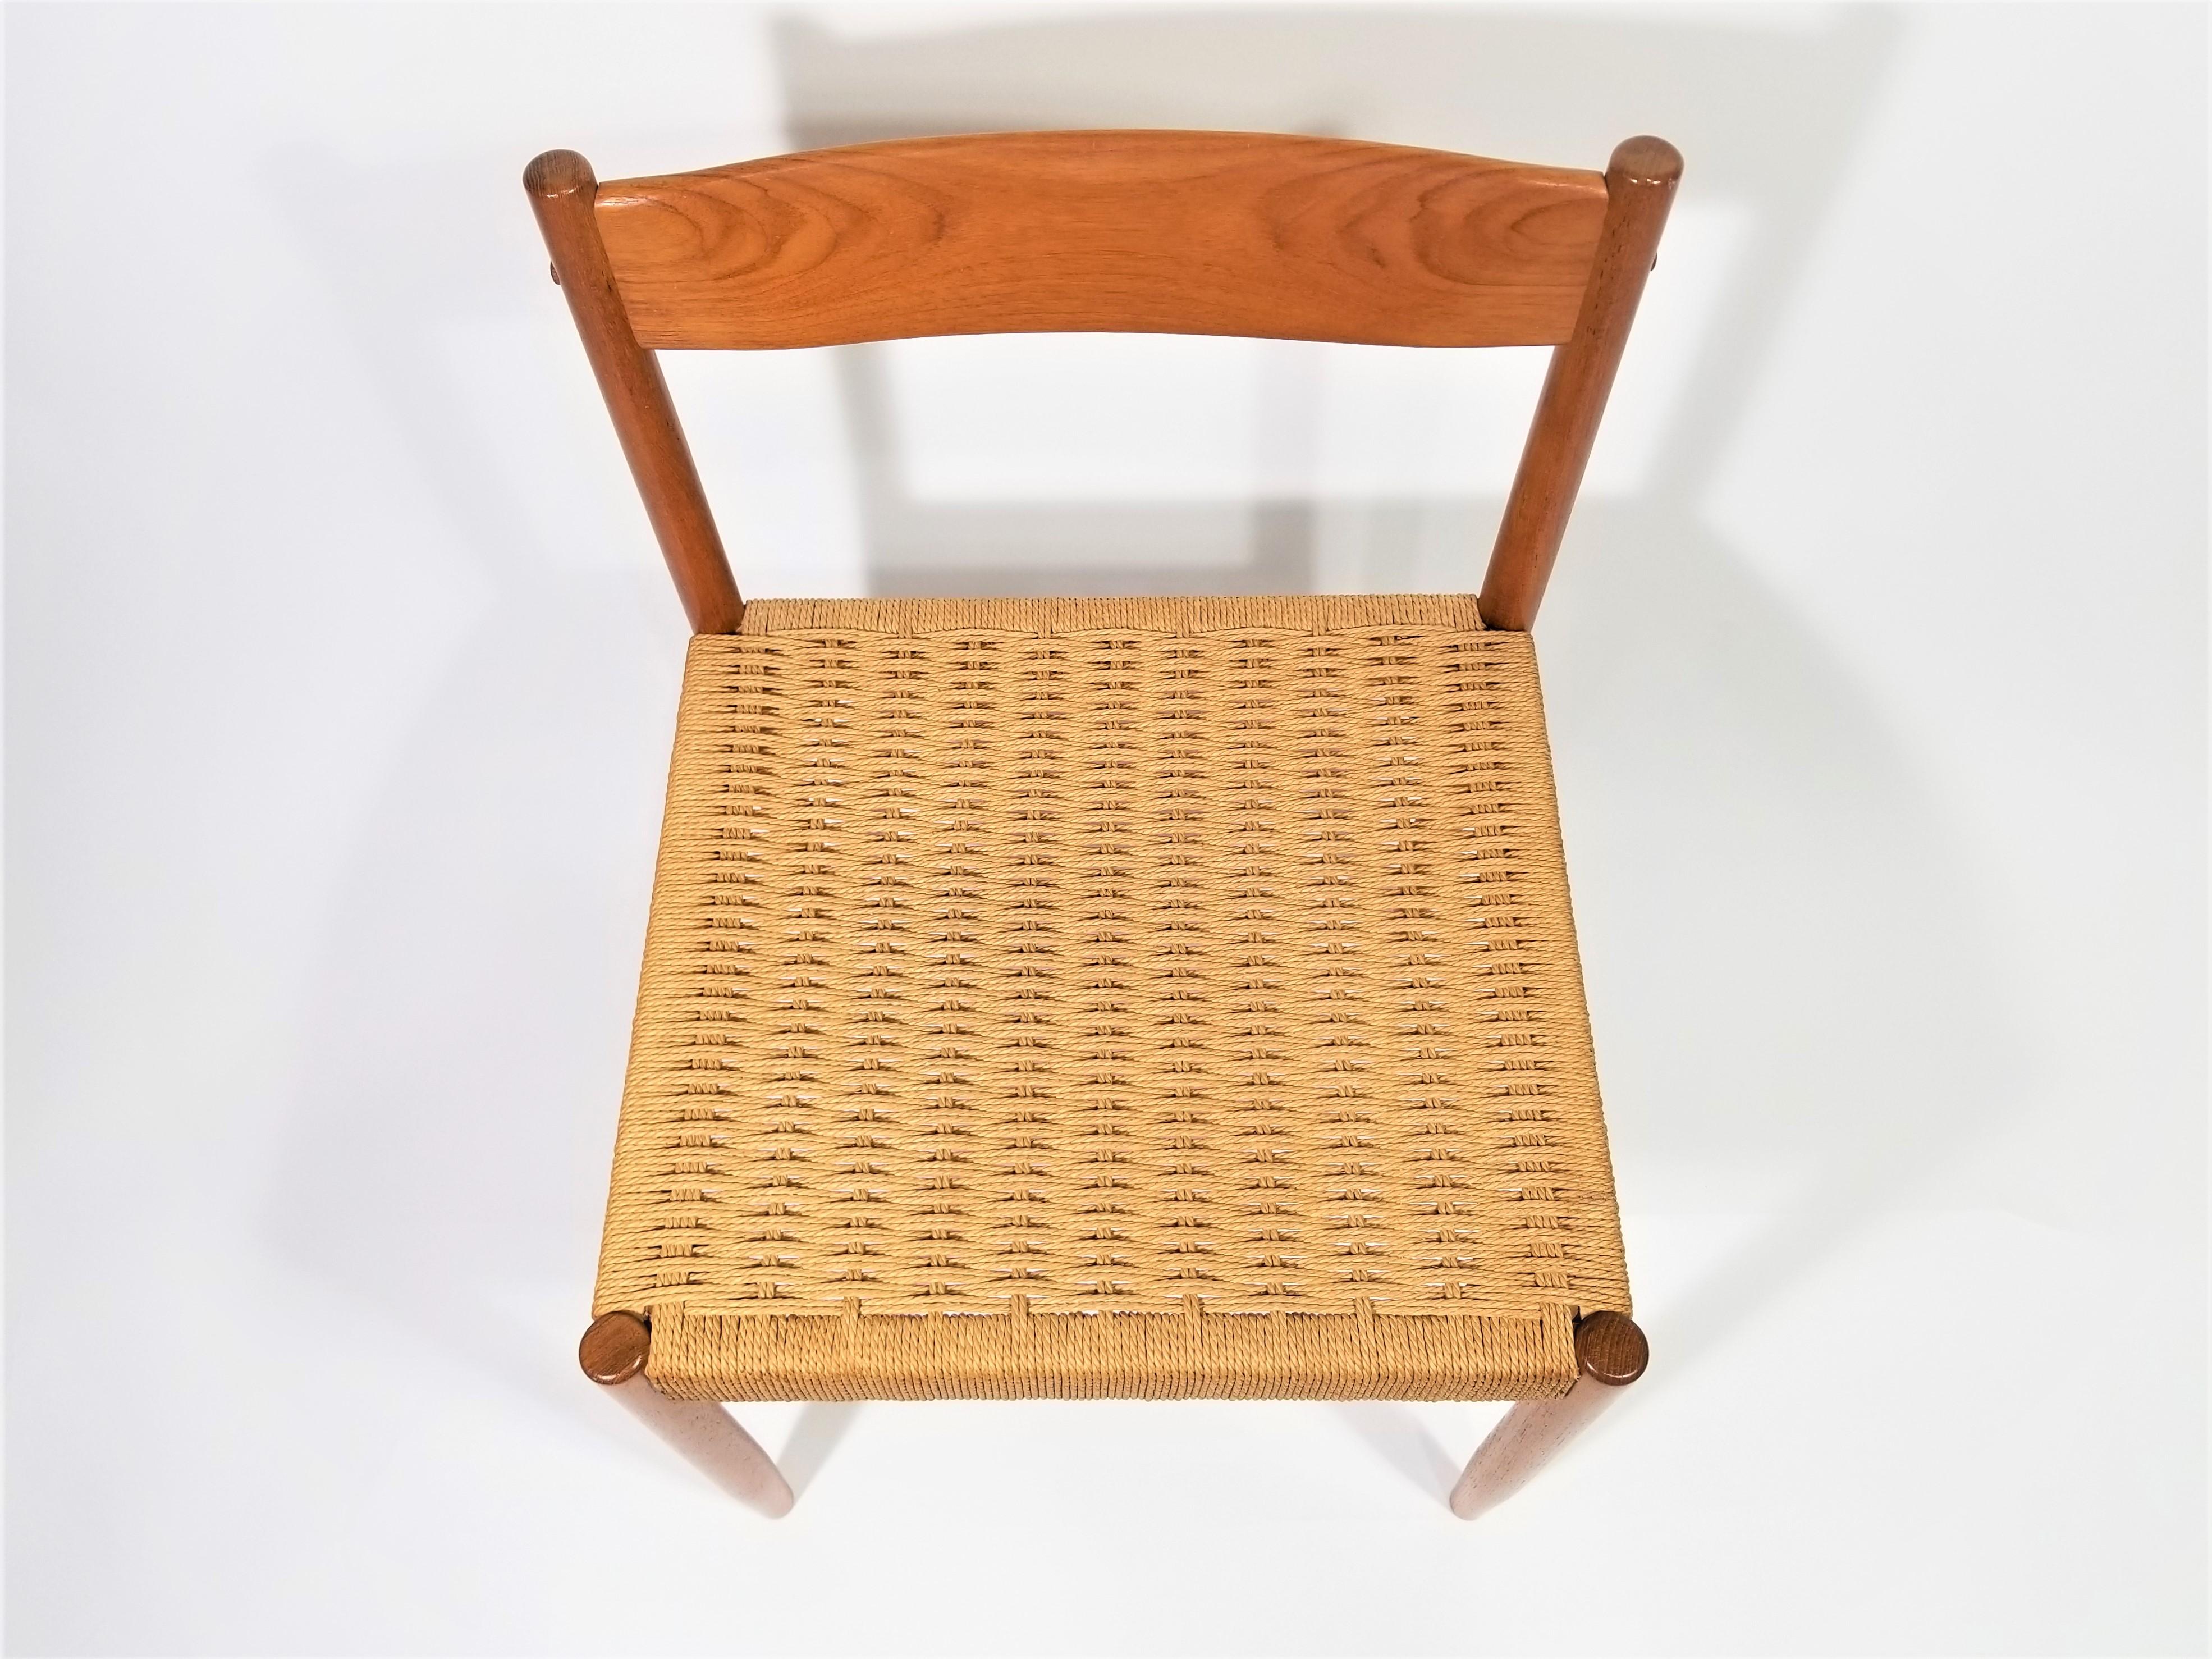 Rope Poul Volther for Frem Rojle Danish Teak Woven Chair Midcentury 1960s  For Sale